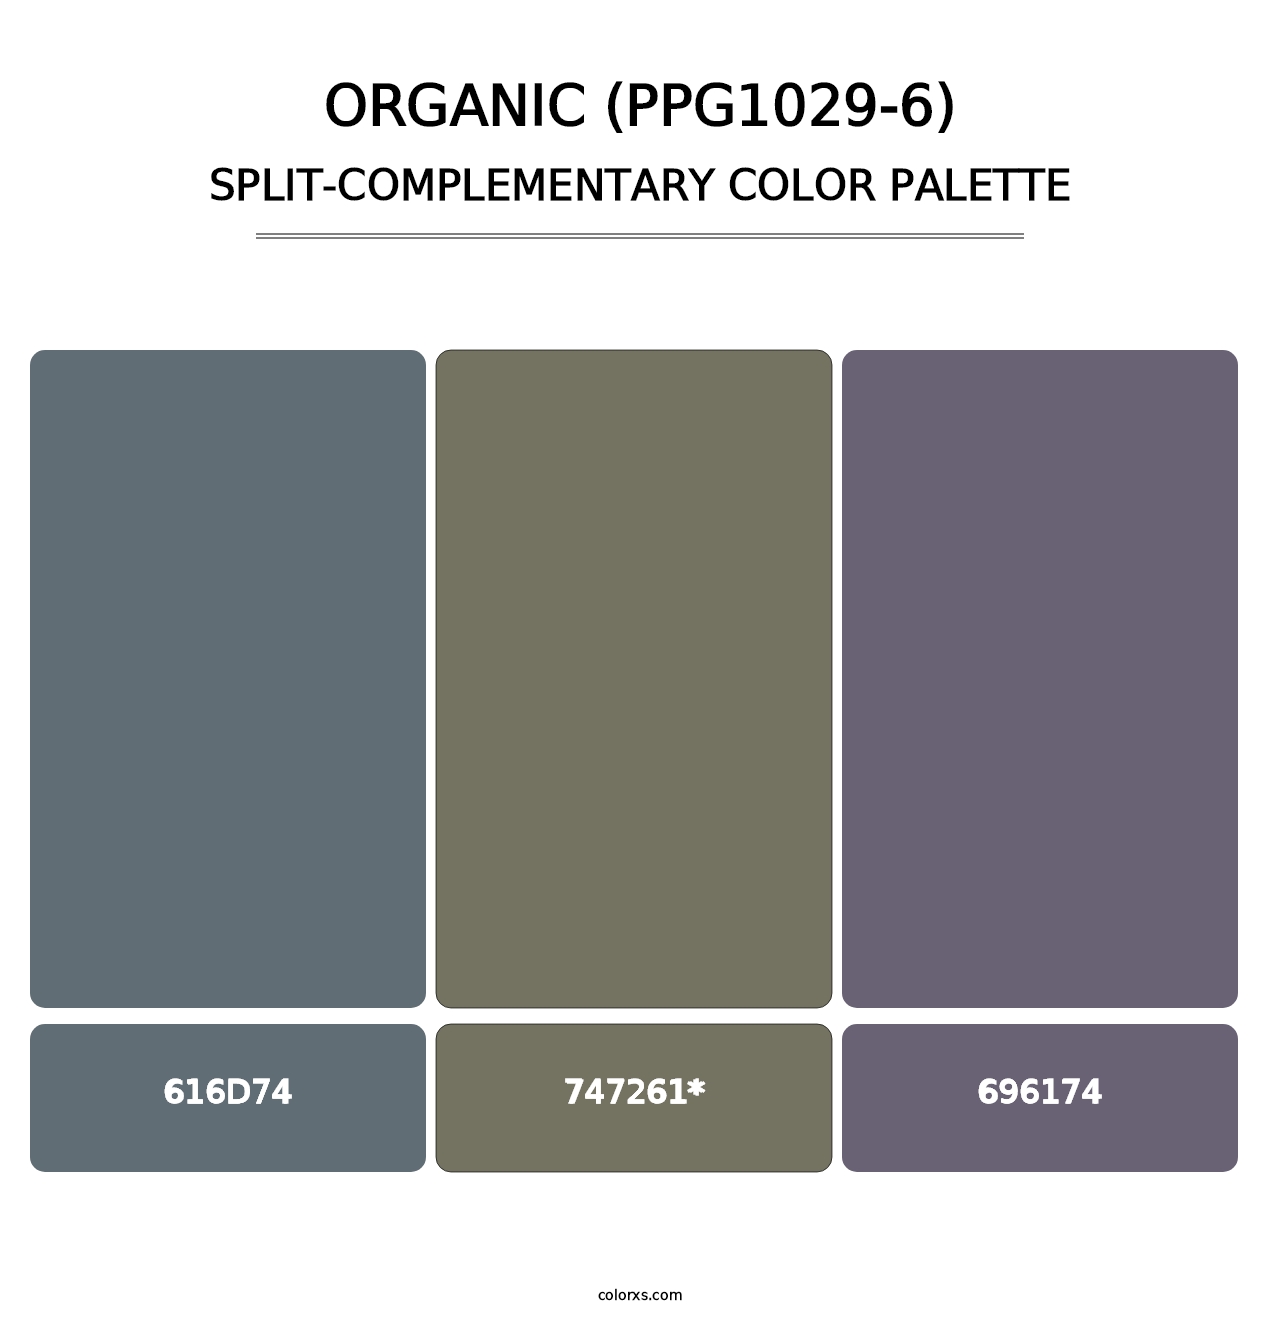 Organic (PPG1029-6) - Split-Complementary Color Palette